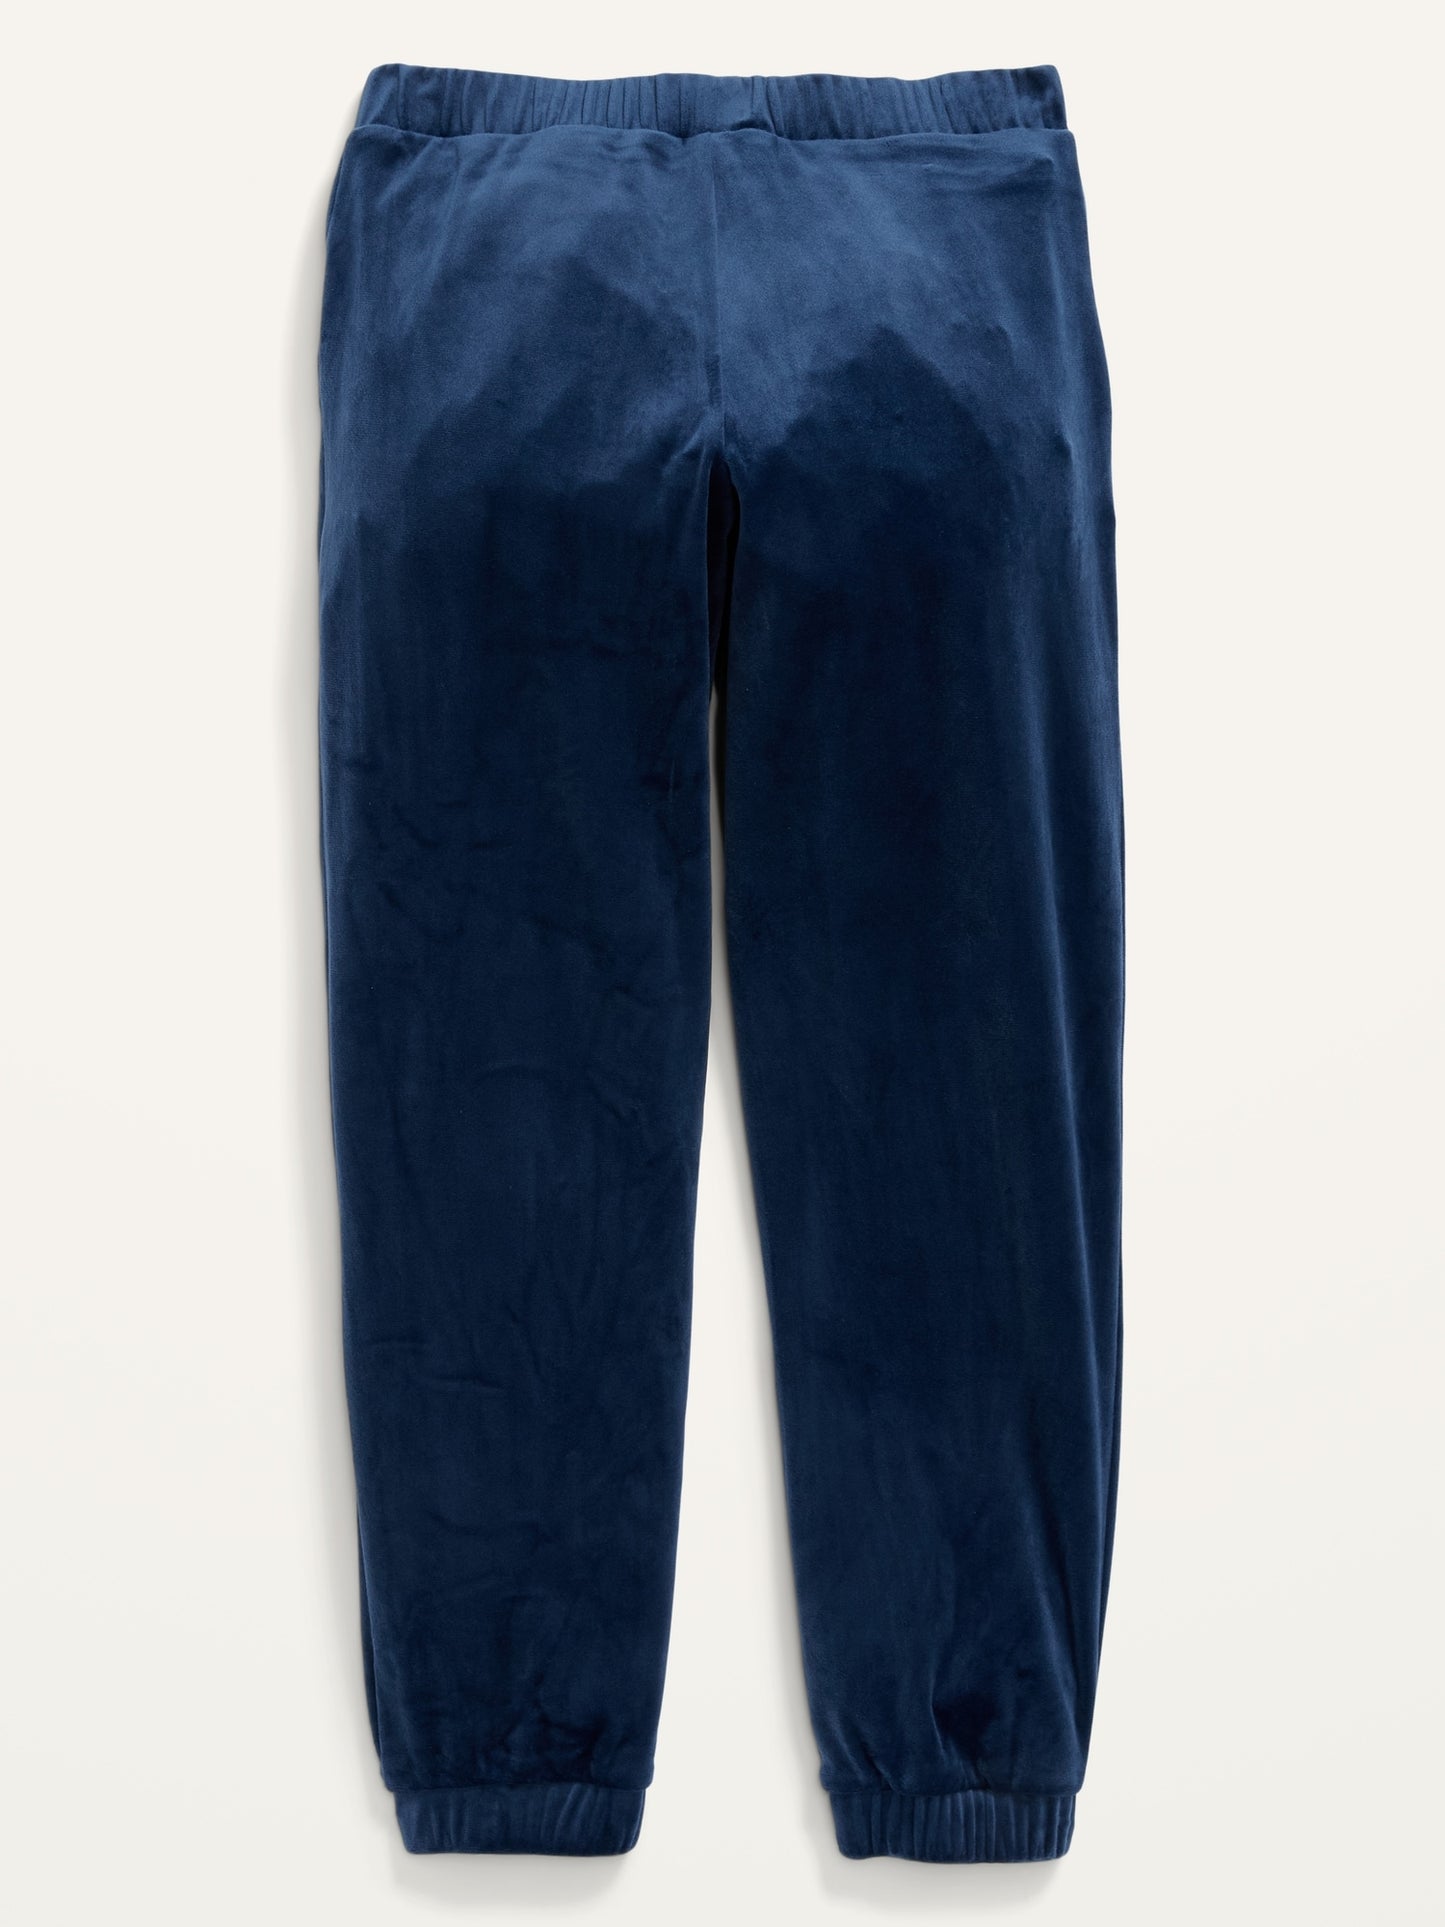 ON Cozy Velour Jogger Sweatpants For Girls - Before Dawn